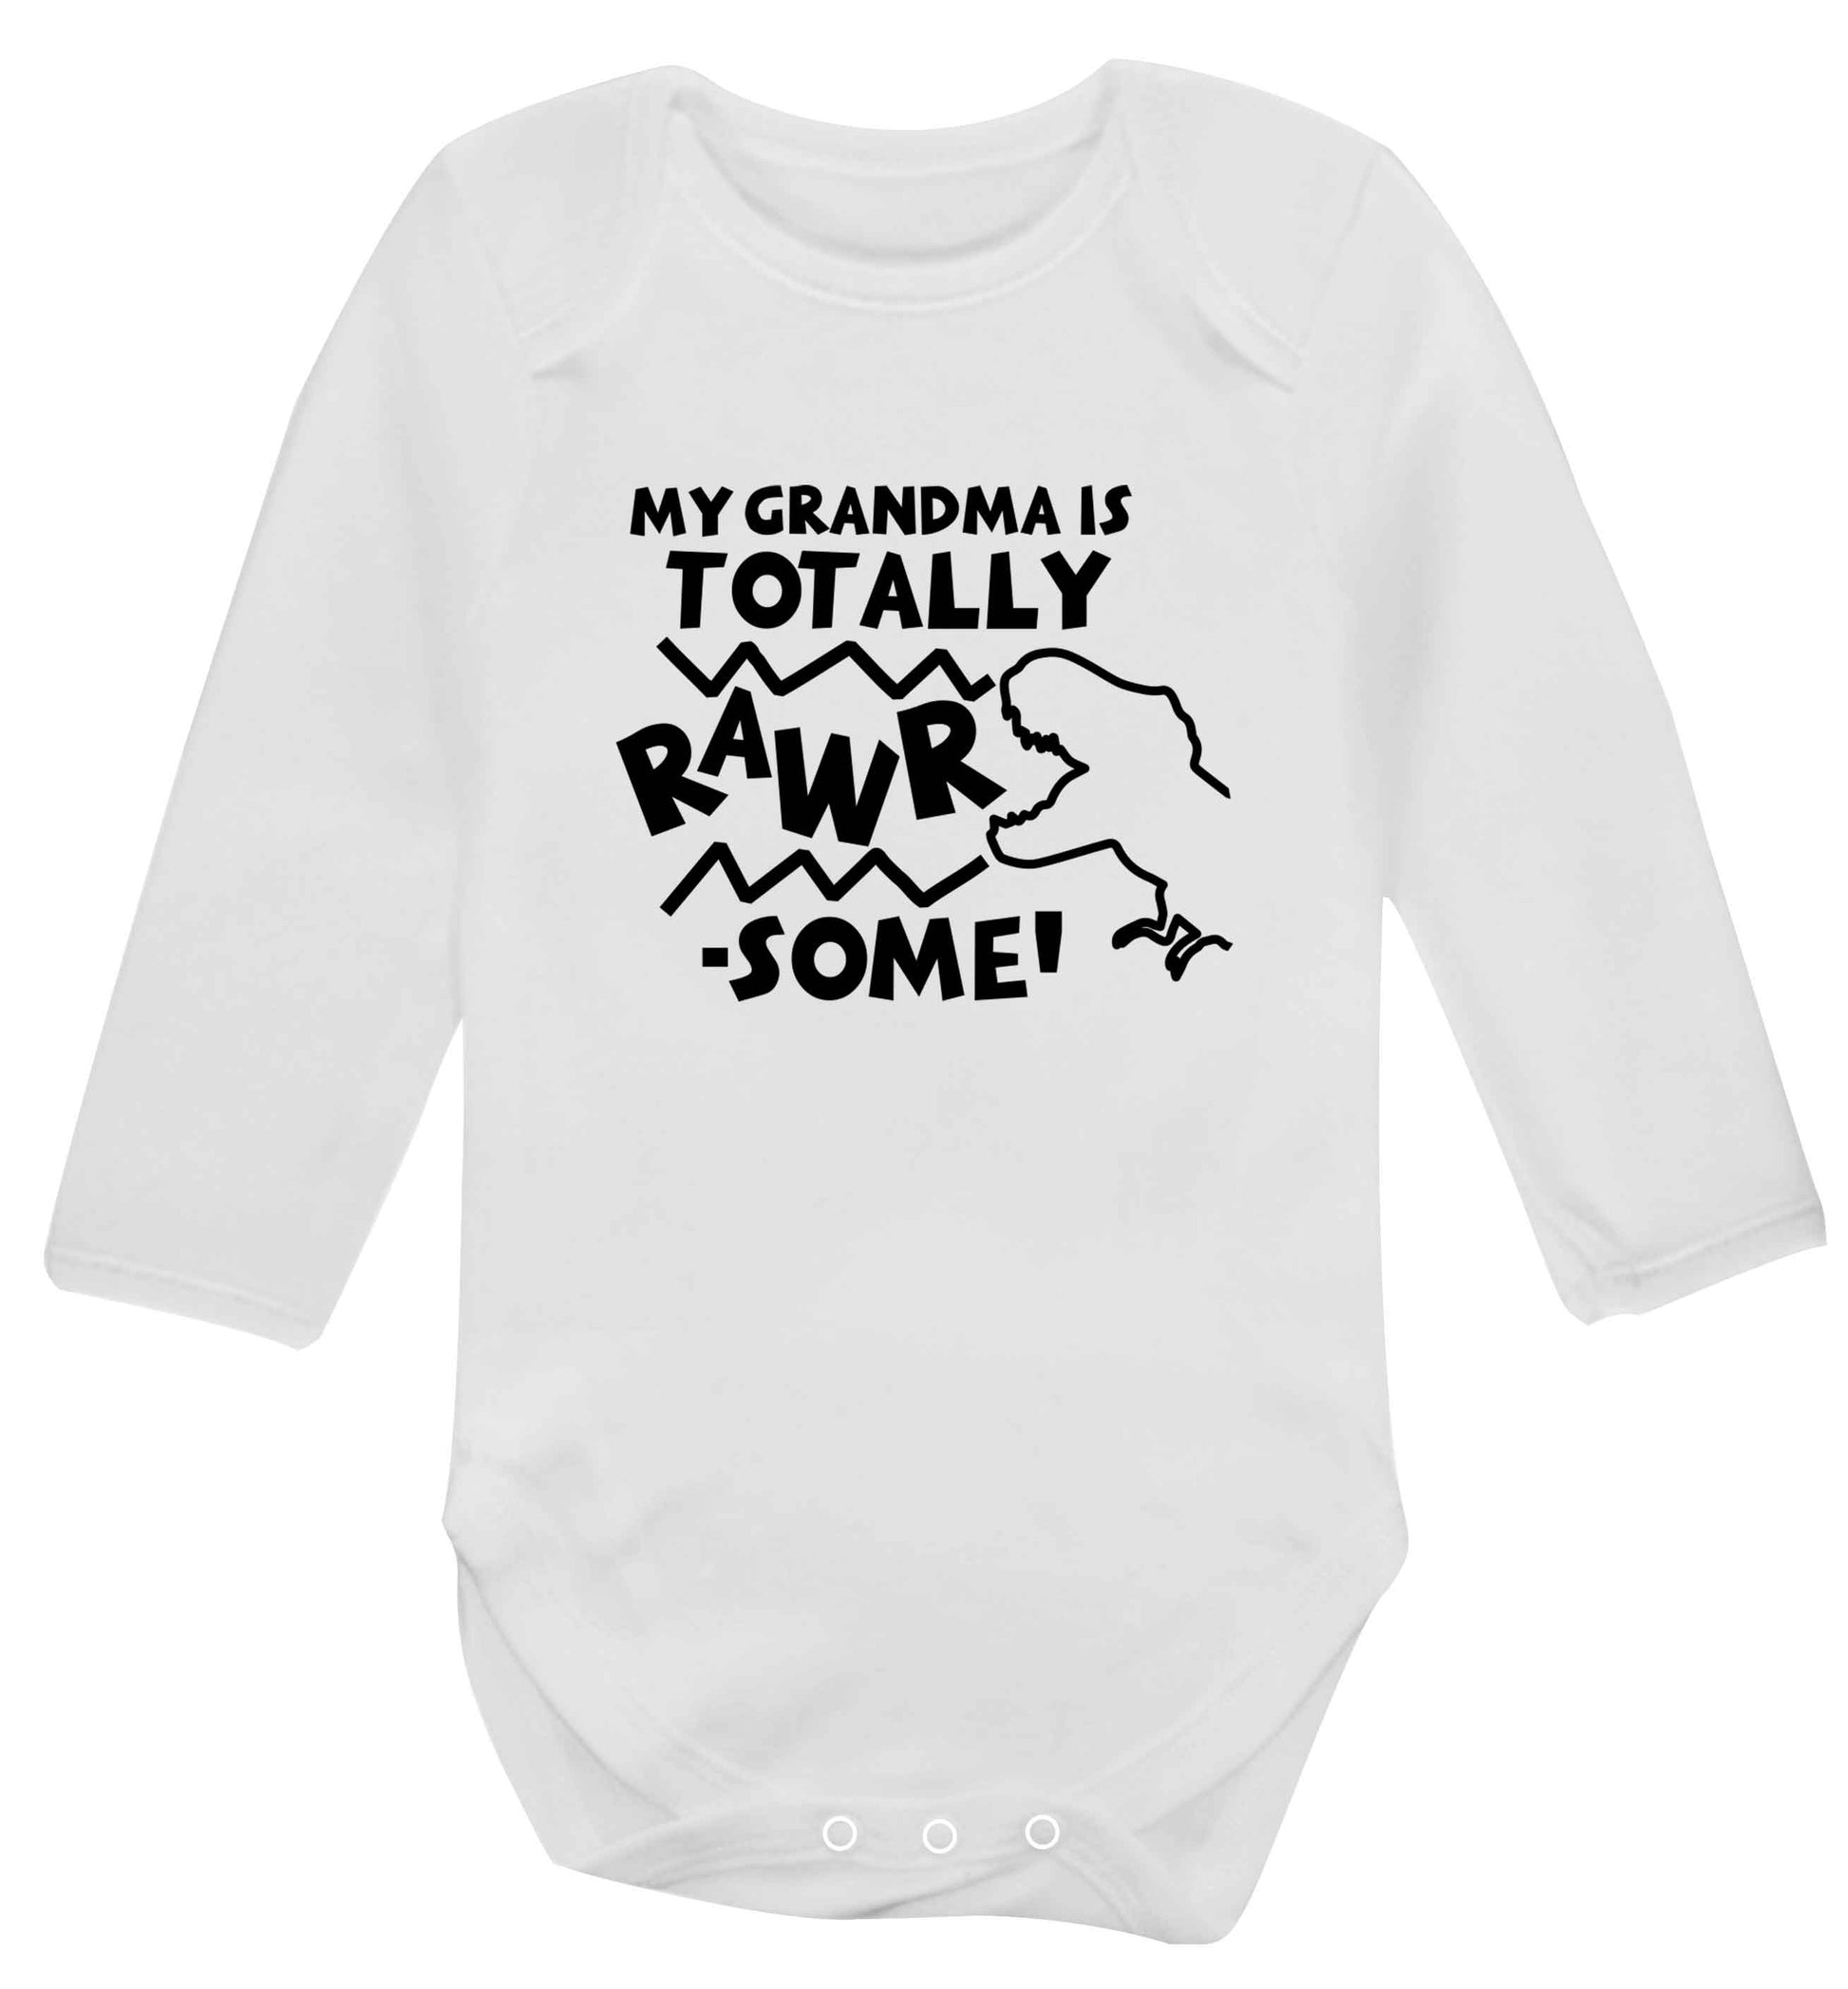 My grandma is totally rawrsome baby vest long sleeved white 6-12 months